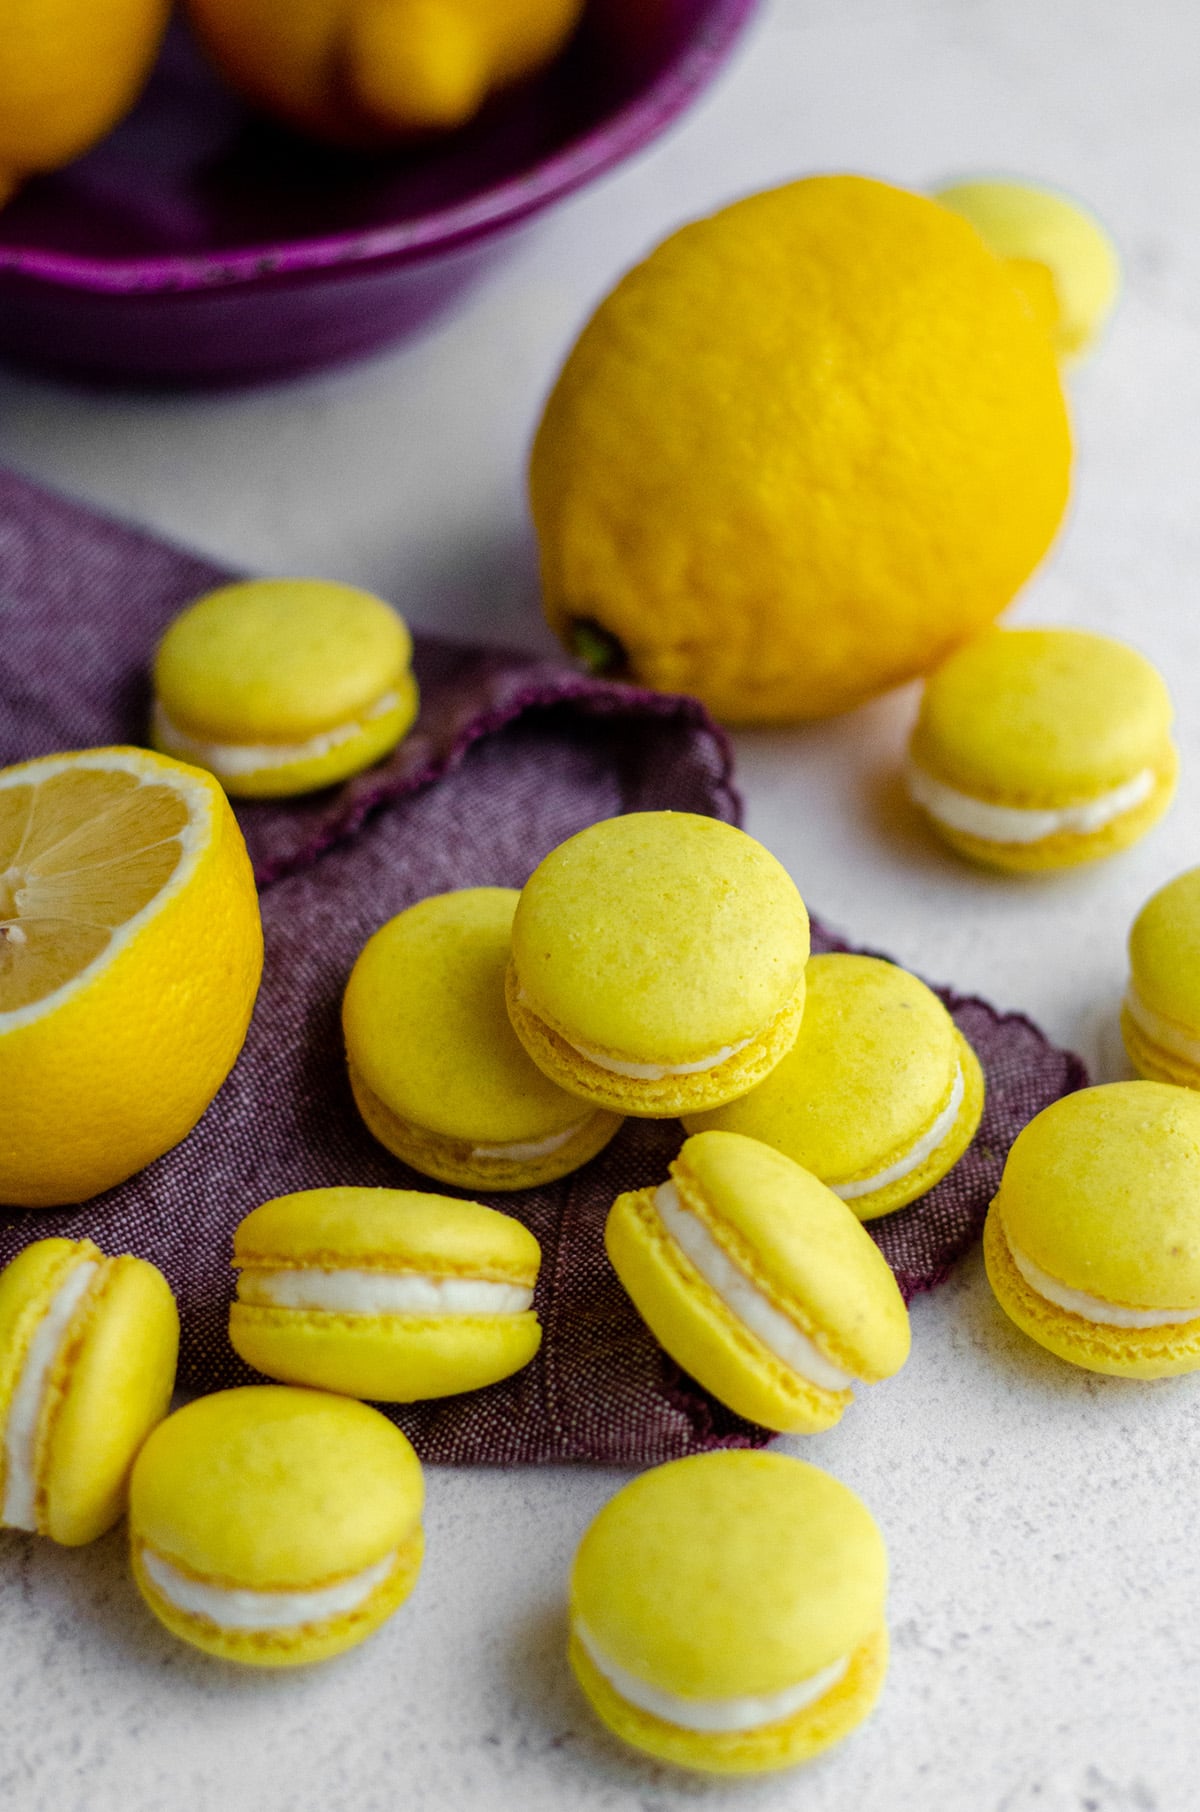 lemon macarons in a group on a purple kitchen towel